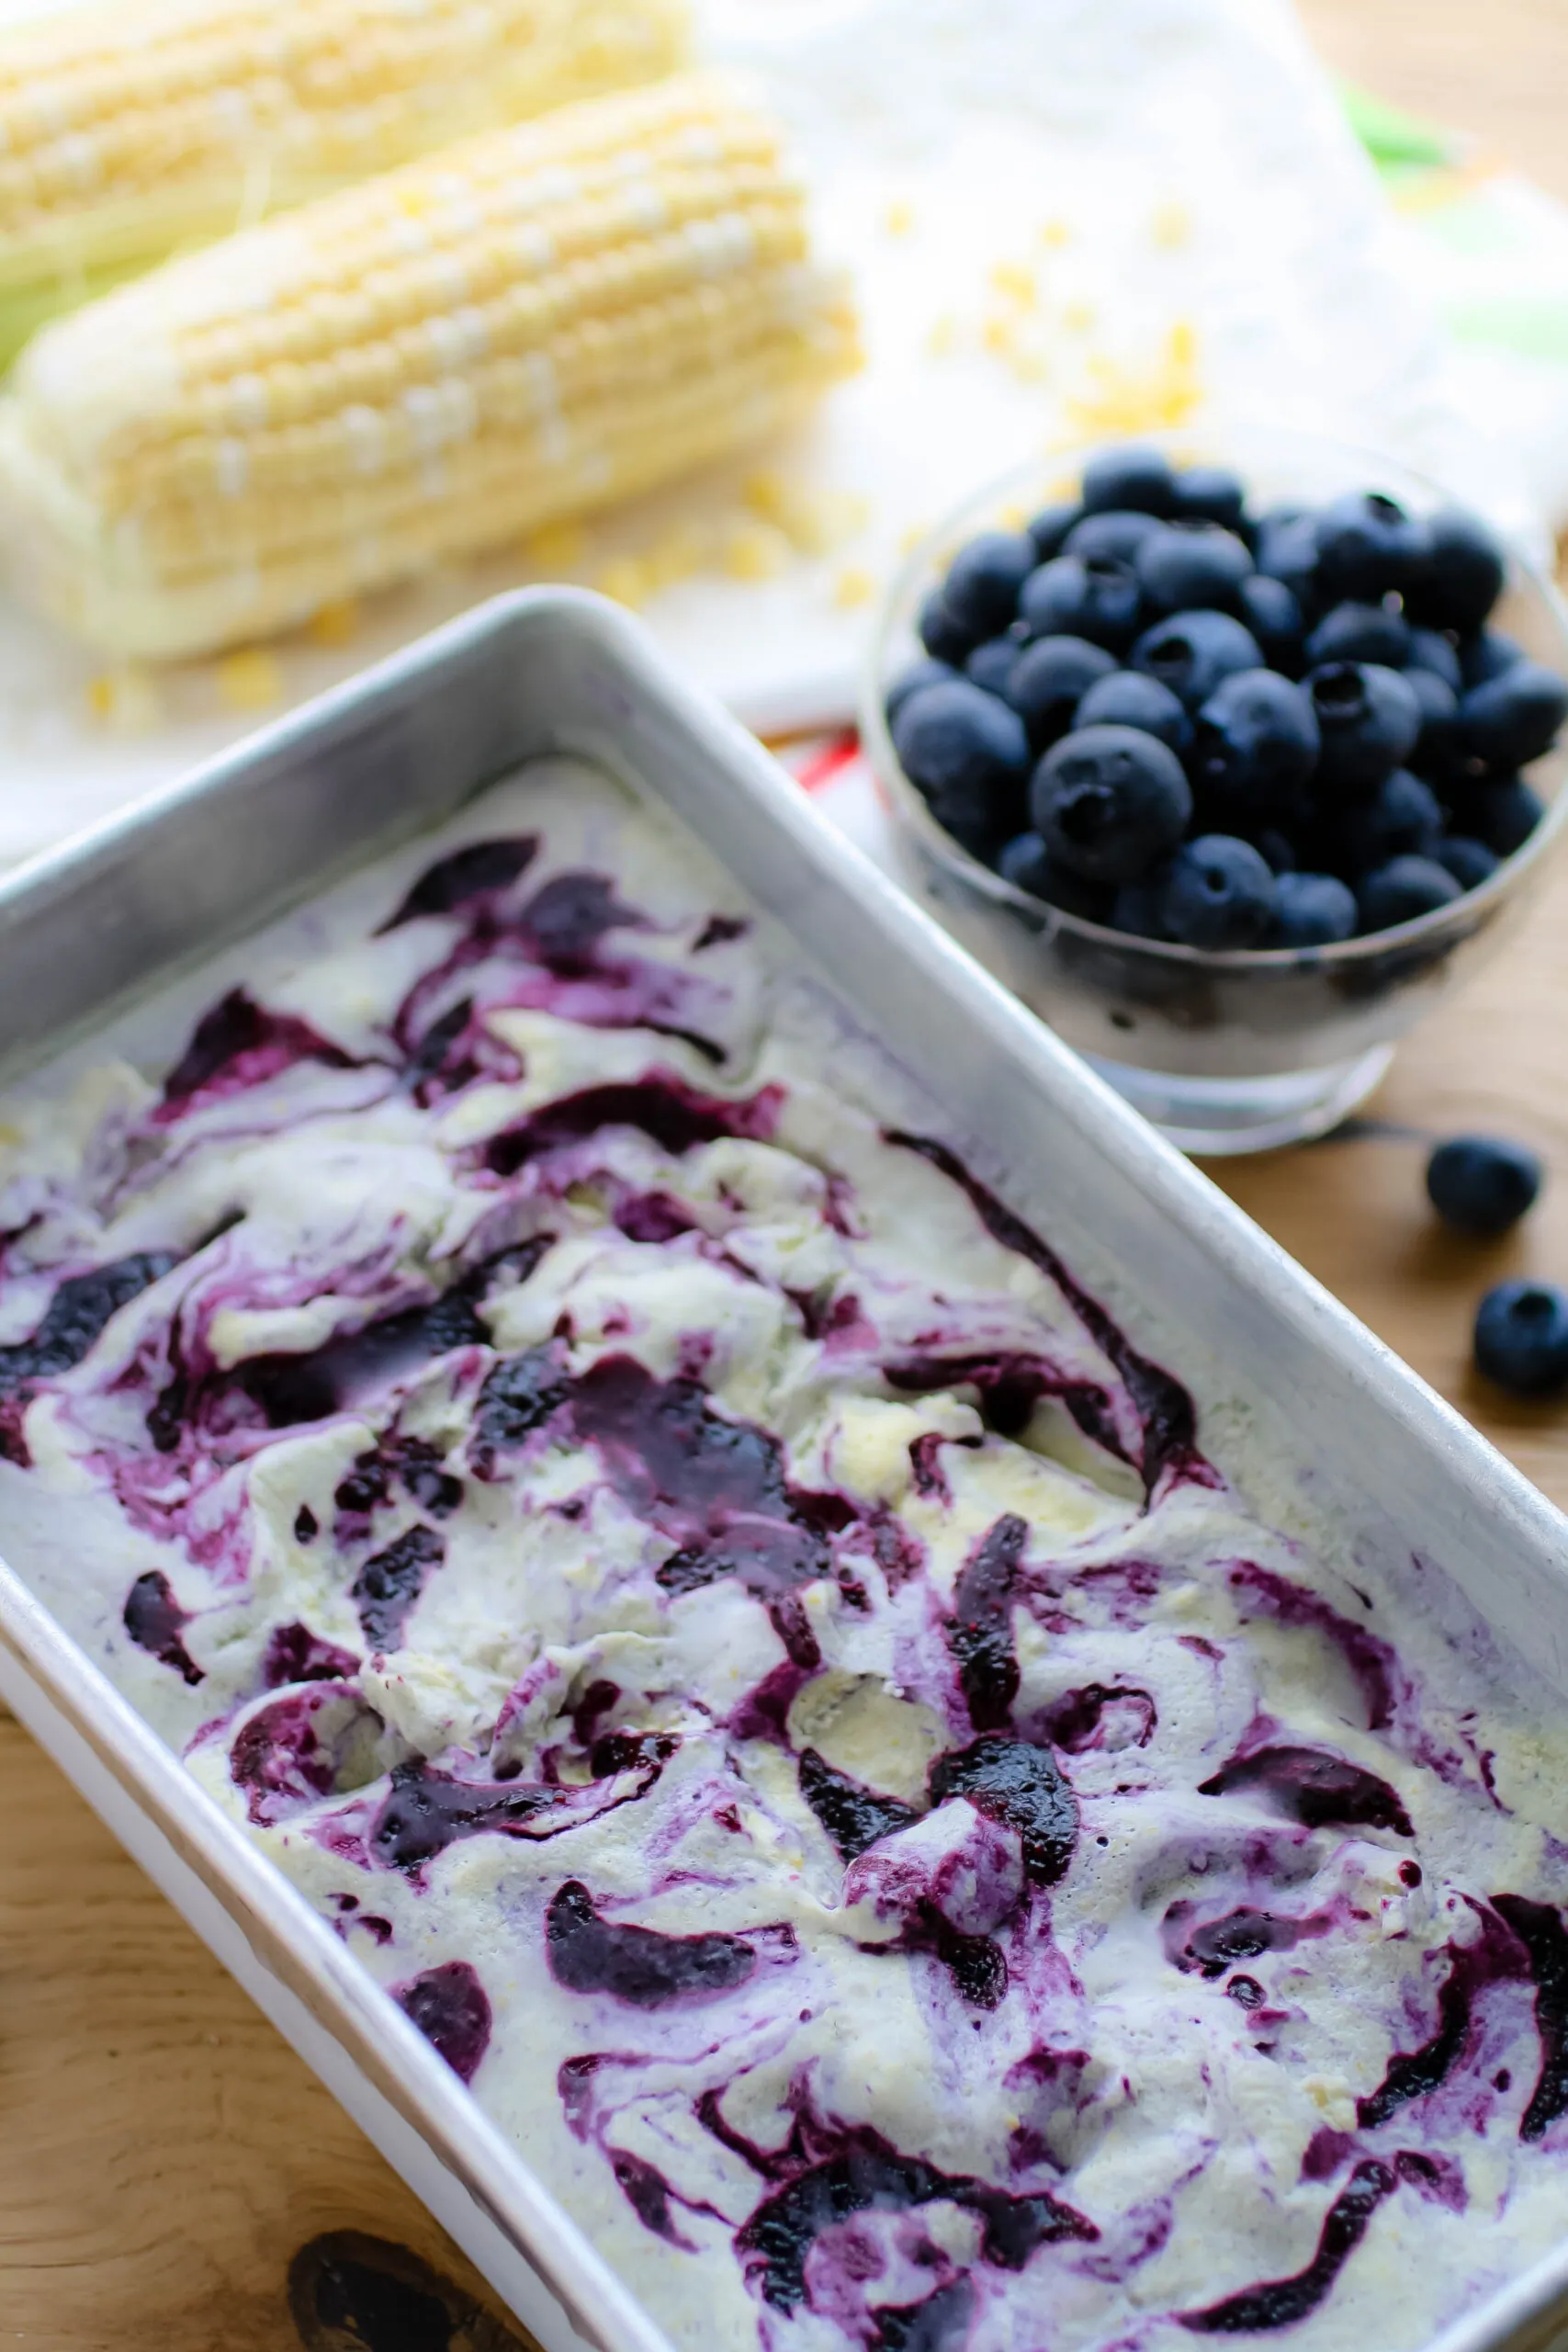 Sweet Corn and Blueberry Ice Cream is a frozen treat that has "summer" written all over it!